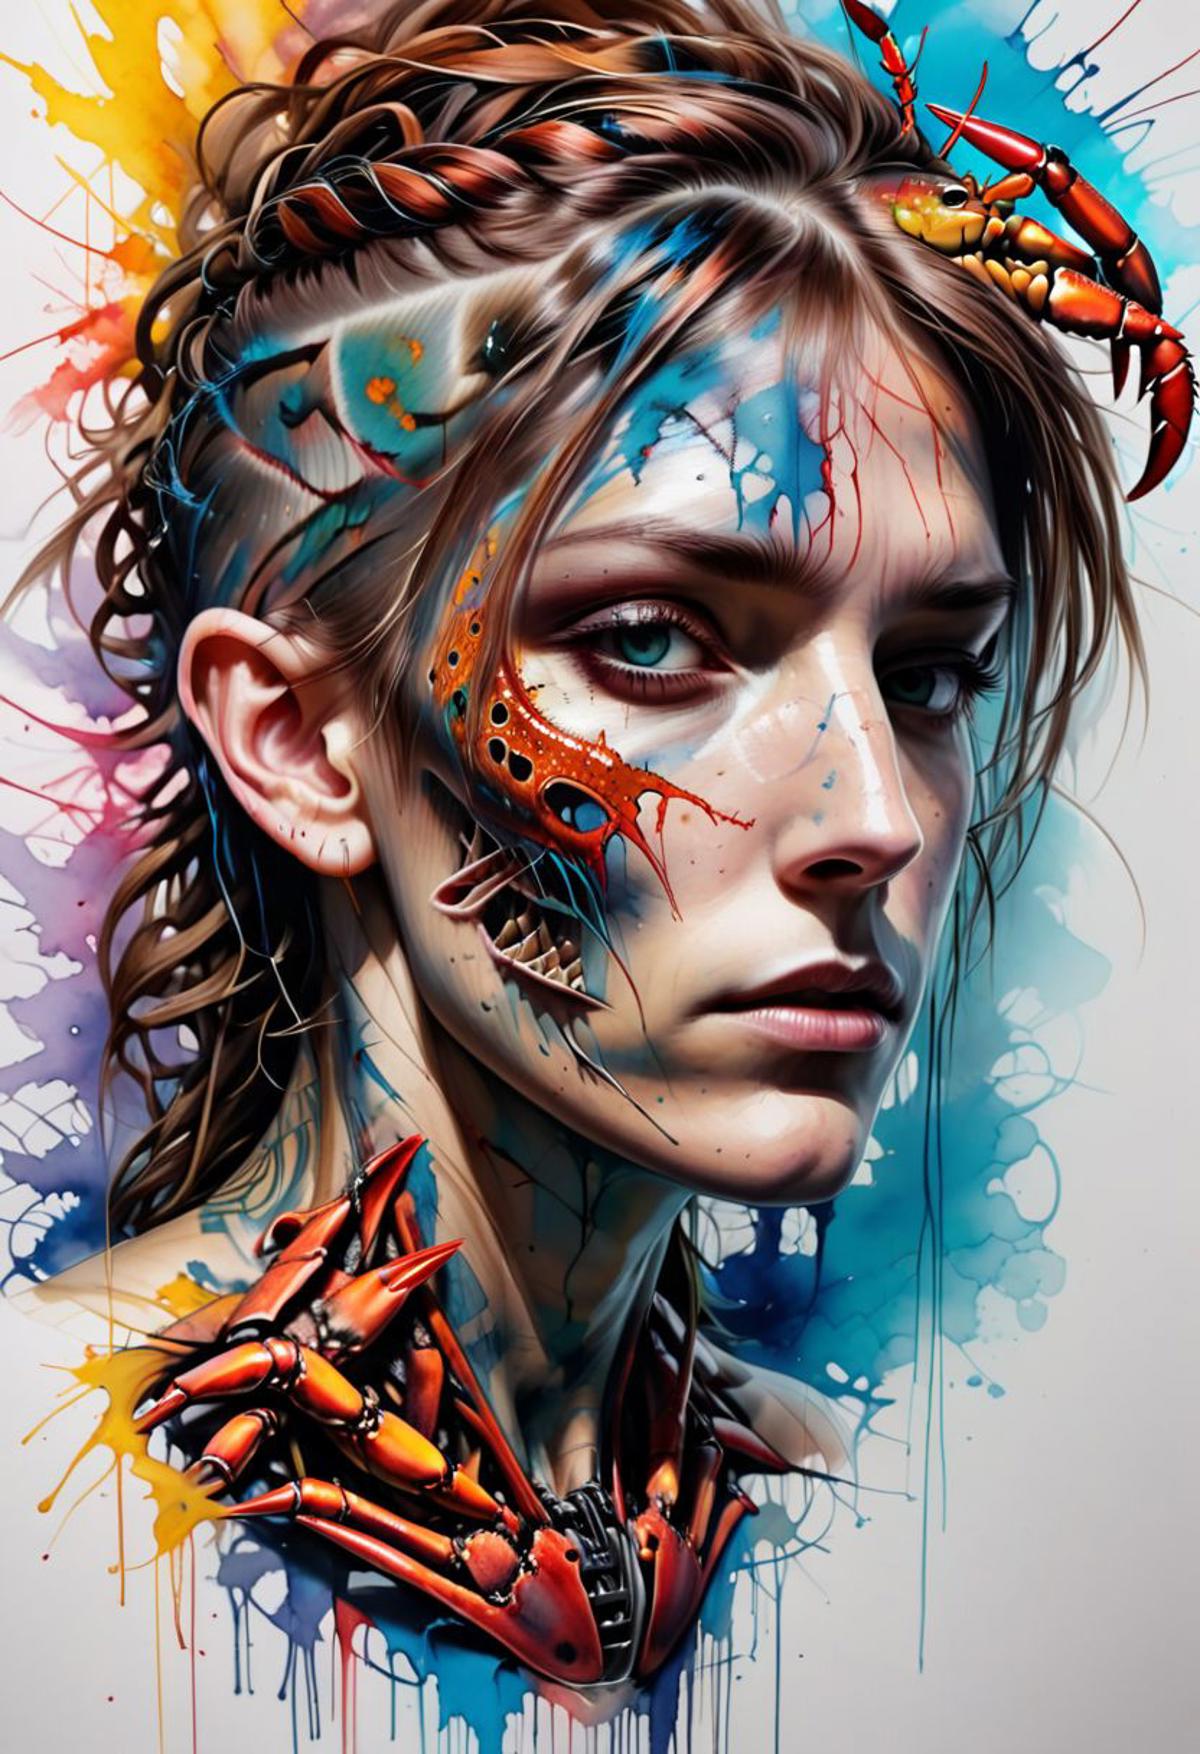 Carne Griffiths XL Style LoRa image by spam57057549